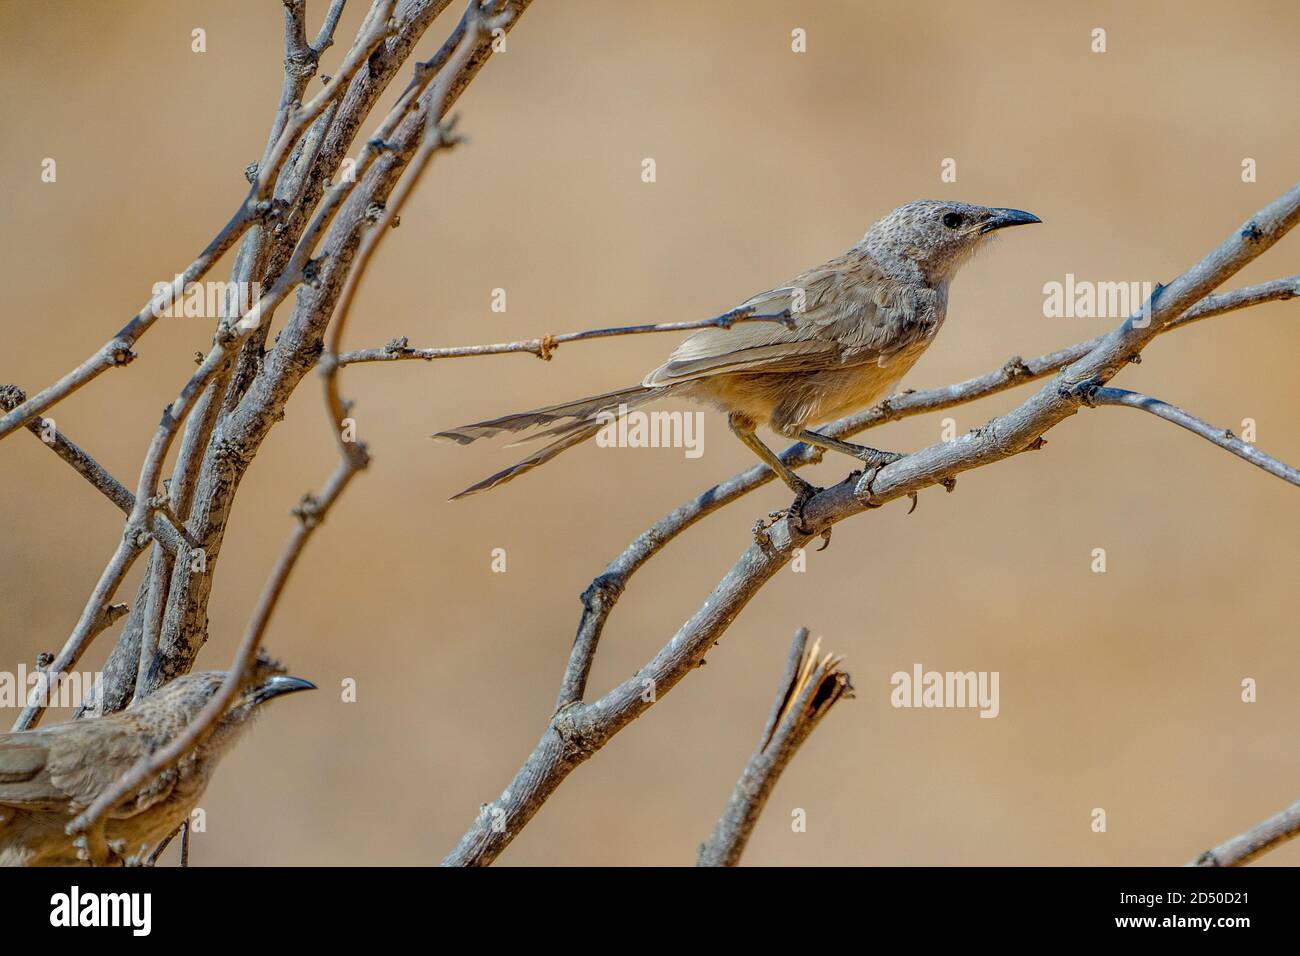 The Arabian babbler (Argya squamiceps) is a passerine bird. It is a communally nesting resident bird of arid scrub in the Middle East which lives toge Stock Photo